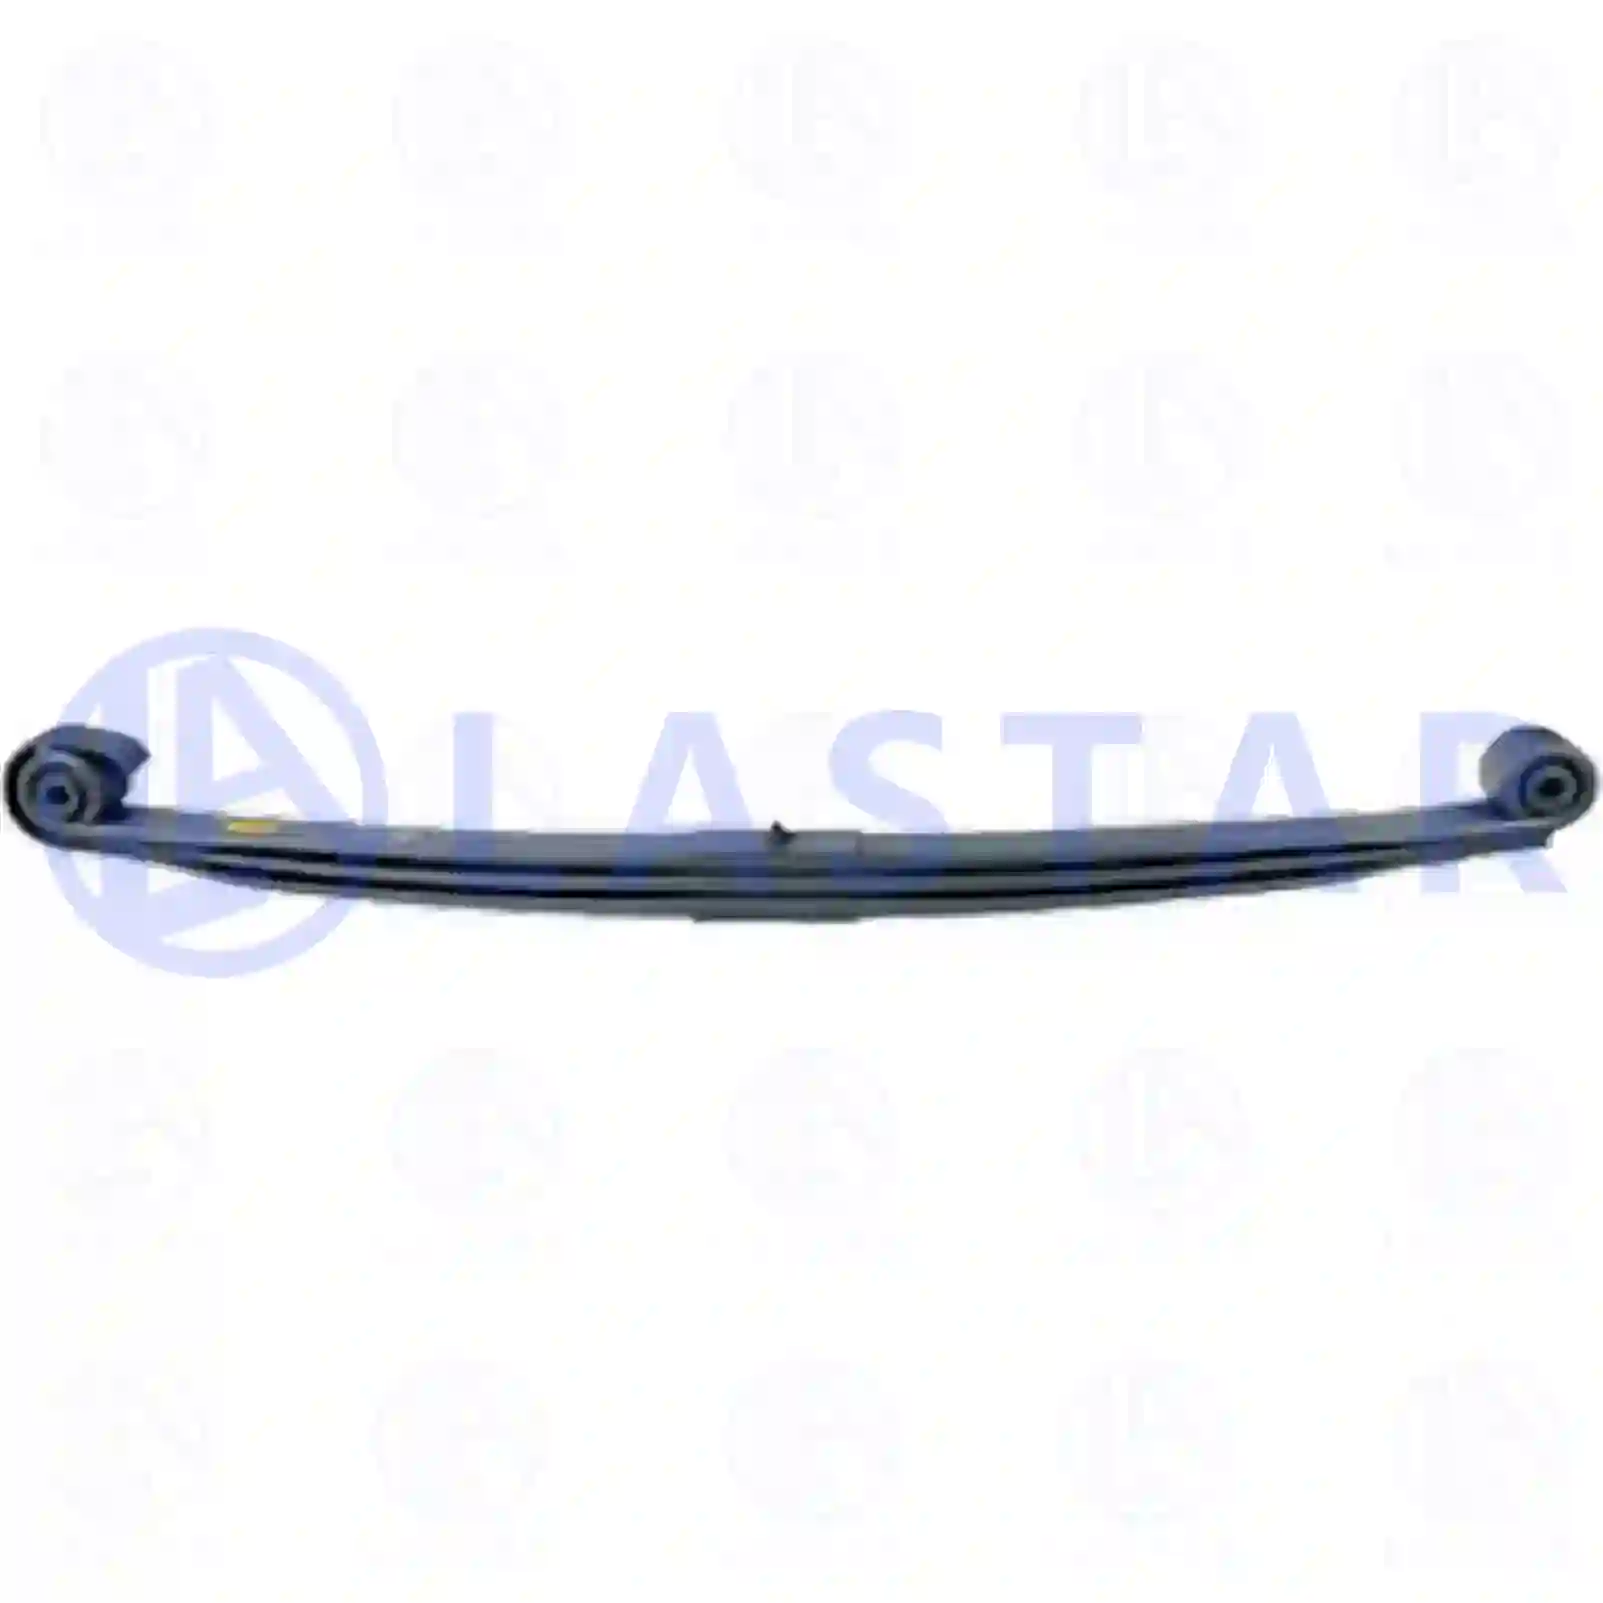 Leaf spring, front, 77728095, 9493200302 ||  77728095 Lastar Spare Part | Truck Spare Parts, Auotomotive Spare Parts Leaf spring, front, 77728095, 9493200302 ||  77728095 Lastar Spare Part | Truck Spare Parts, Auotomotive Spare Parts